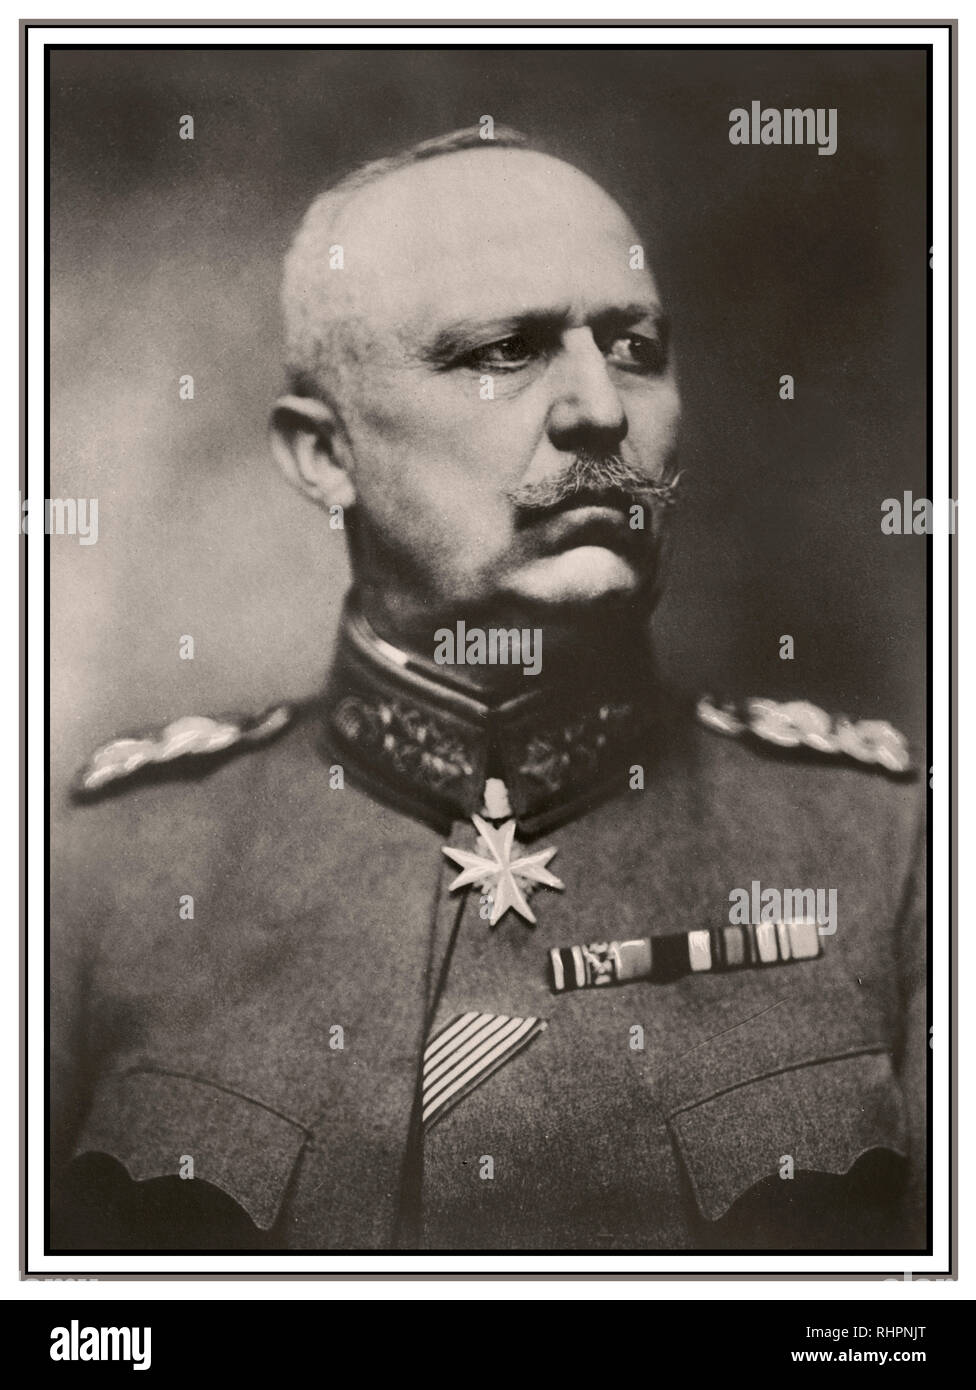 Erich Ludendorff (1865 – 1937) wearing Pour le Mérite, Germany’s highest military award As a German general he achieved major success at Liege and Tannenburg. He rose to be joint head of the German army with Hindenburg. He was a tough uncompromising commander and advocated unrestricted submarine warfare and the policy of ‘lebensraum’. He also led the unsuccessful final German offensive of 1918. Stock Photo